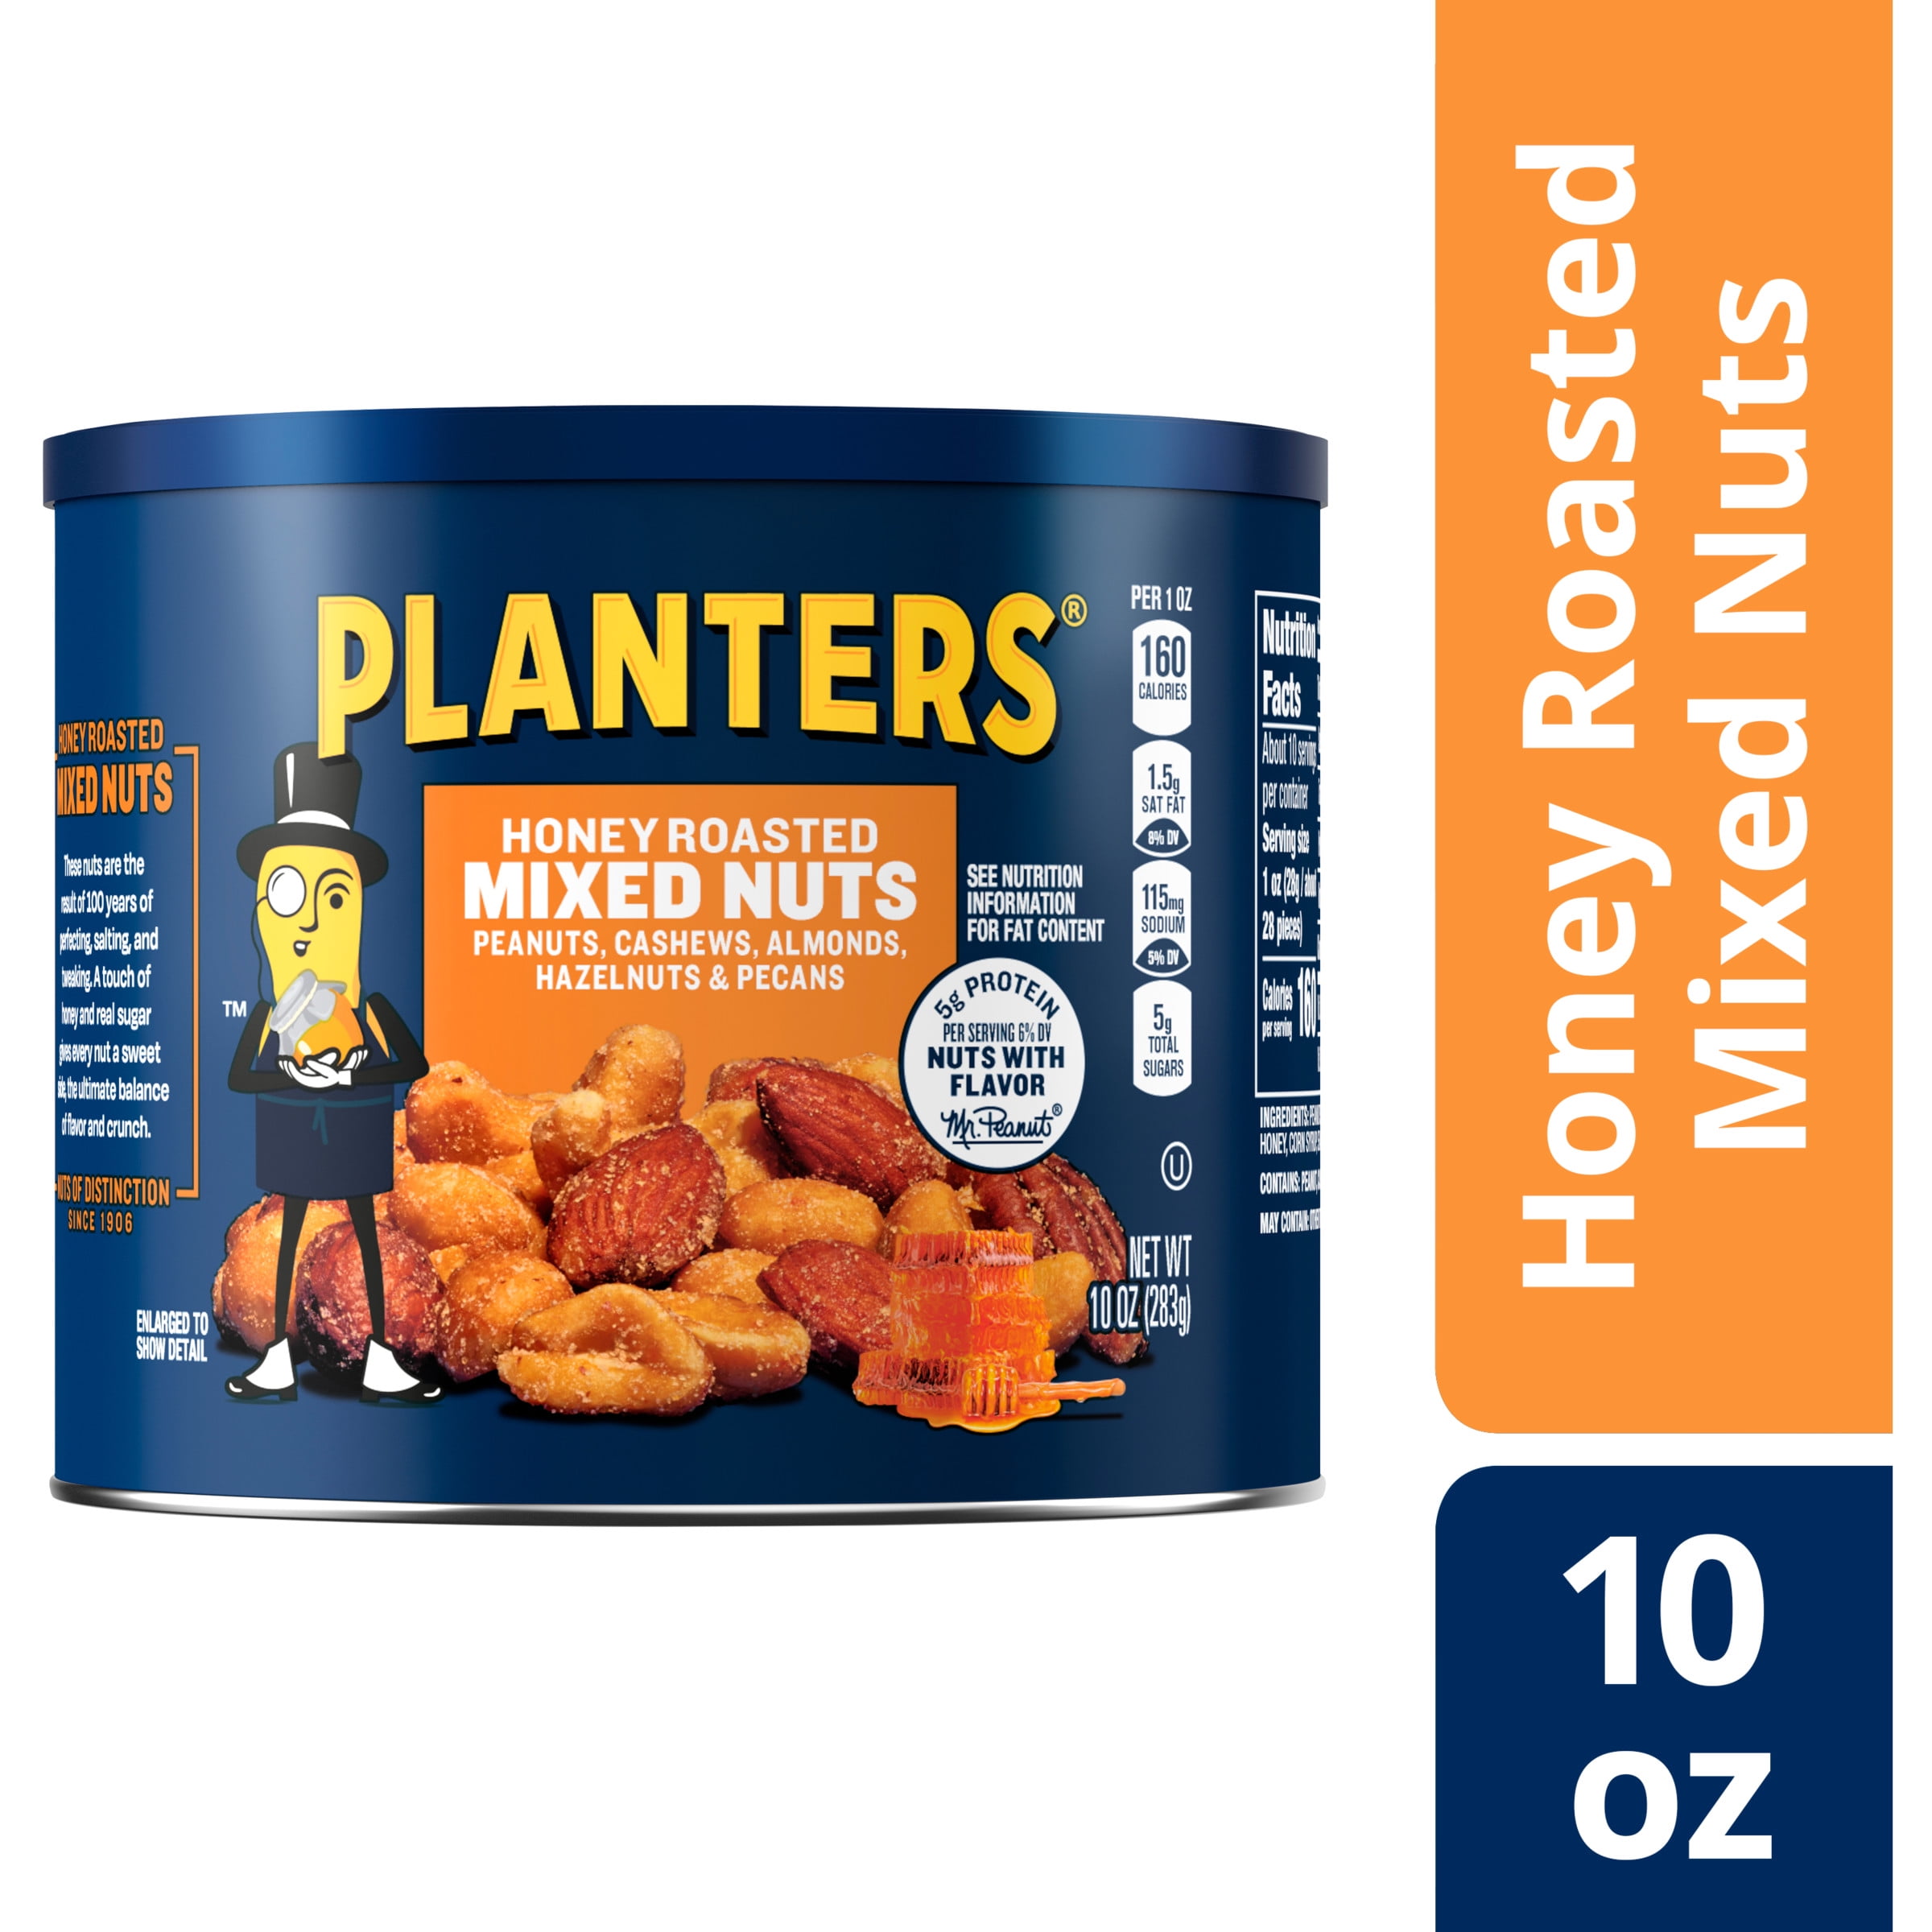 Honey-Roasted Mixed Nuts in 16 oz. Resealable Holiday Pack – Nuts